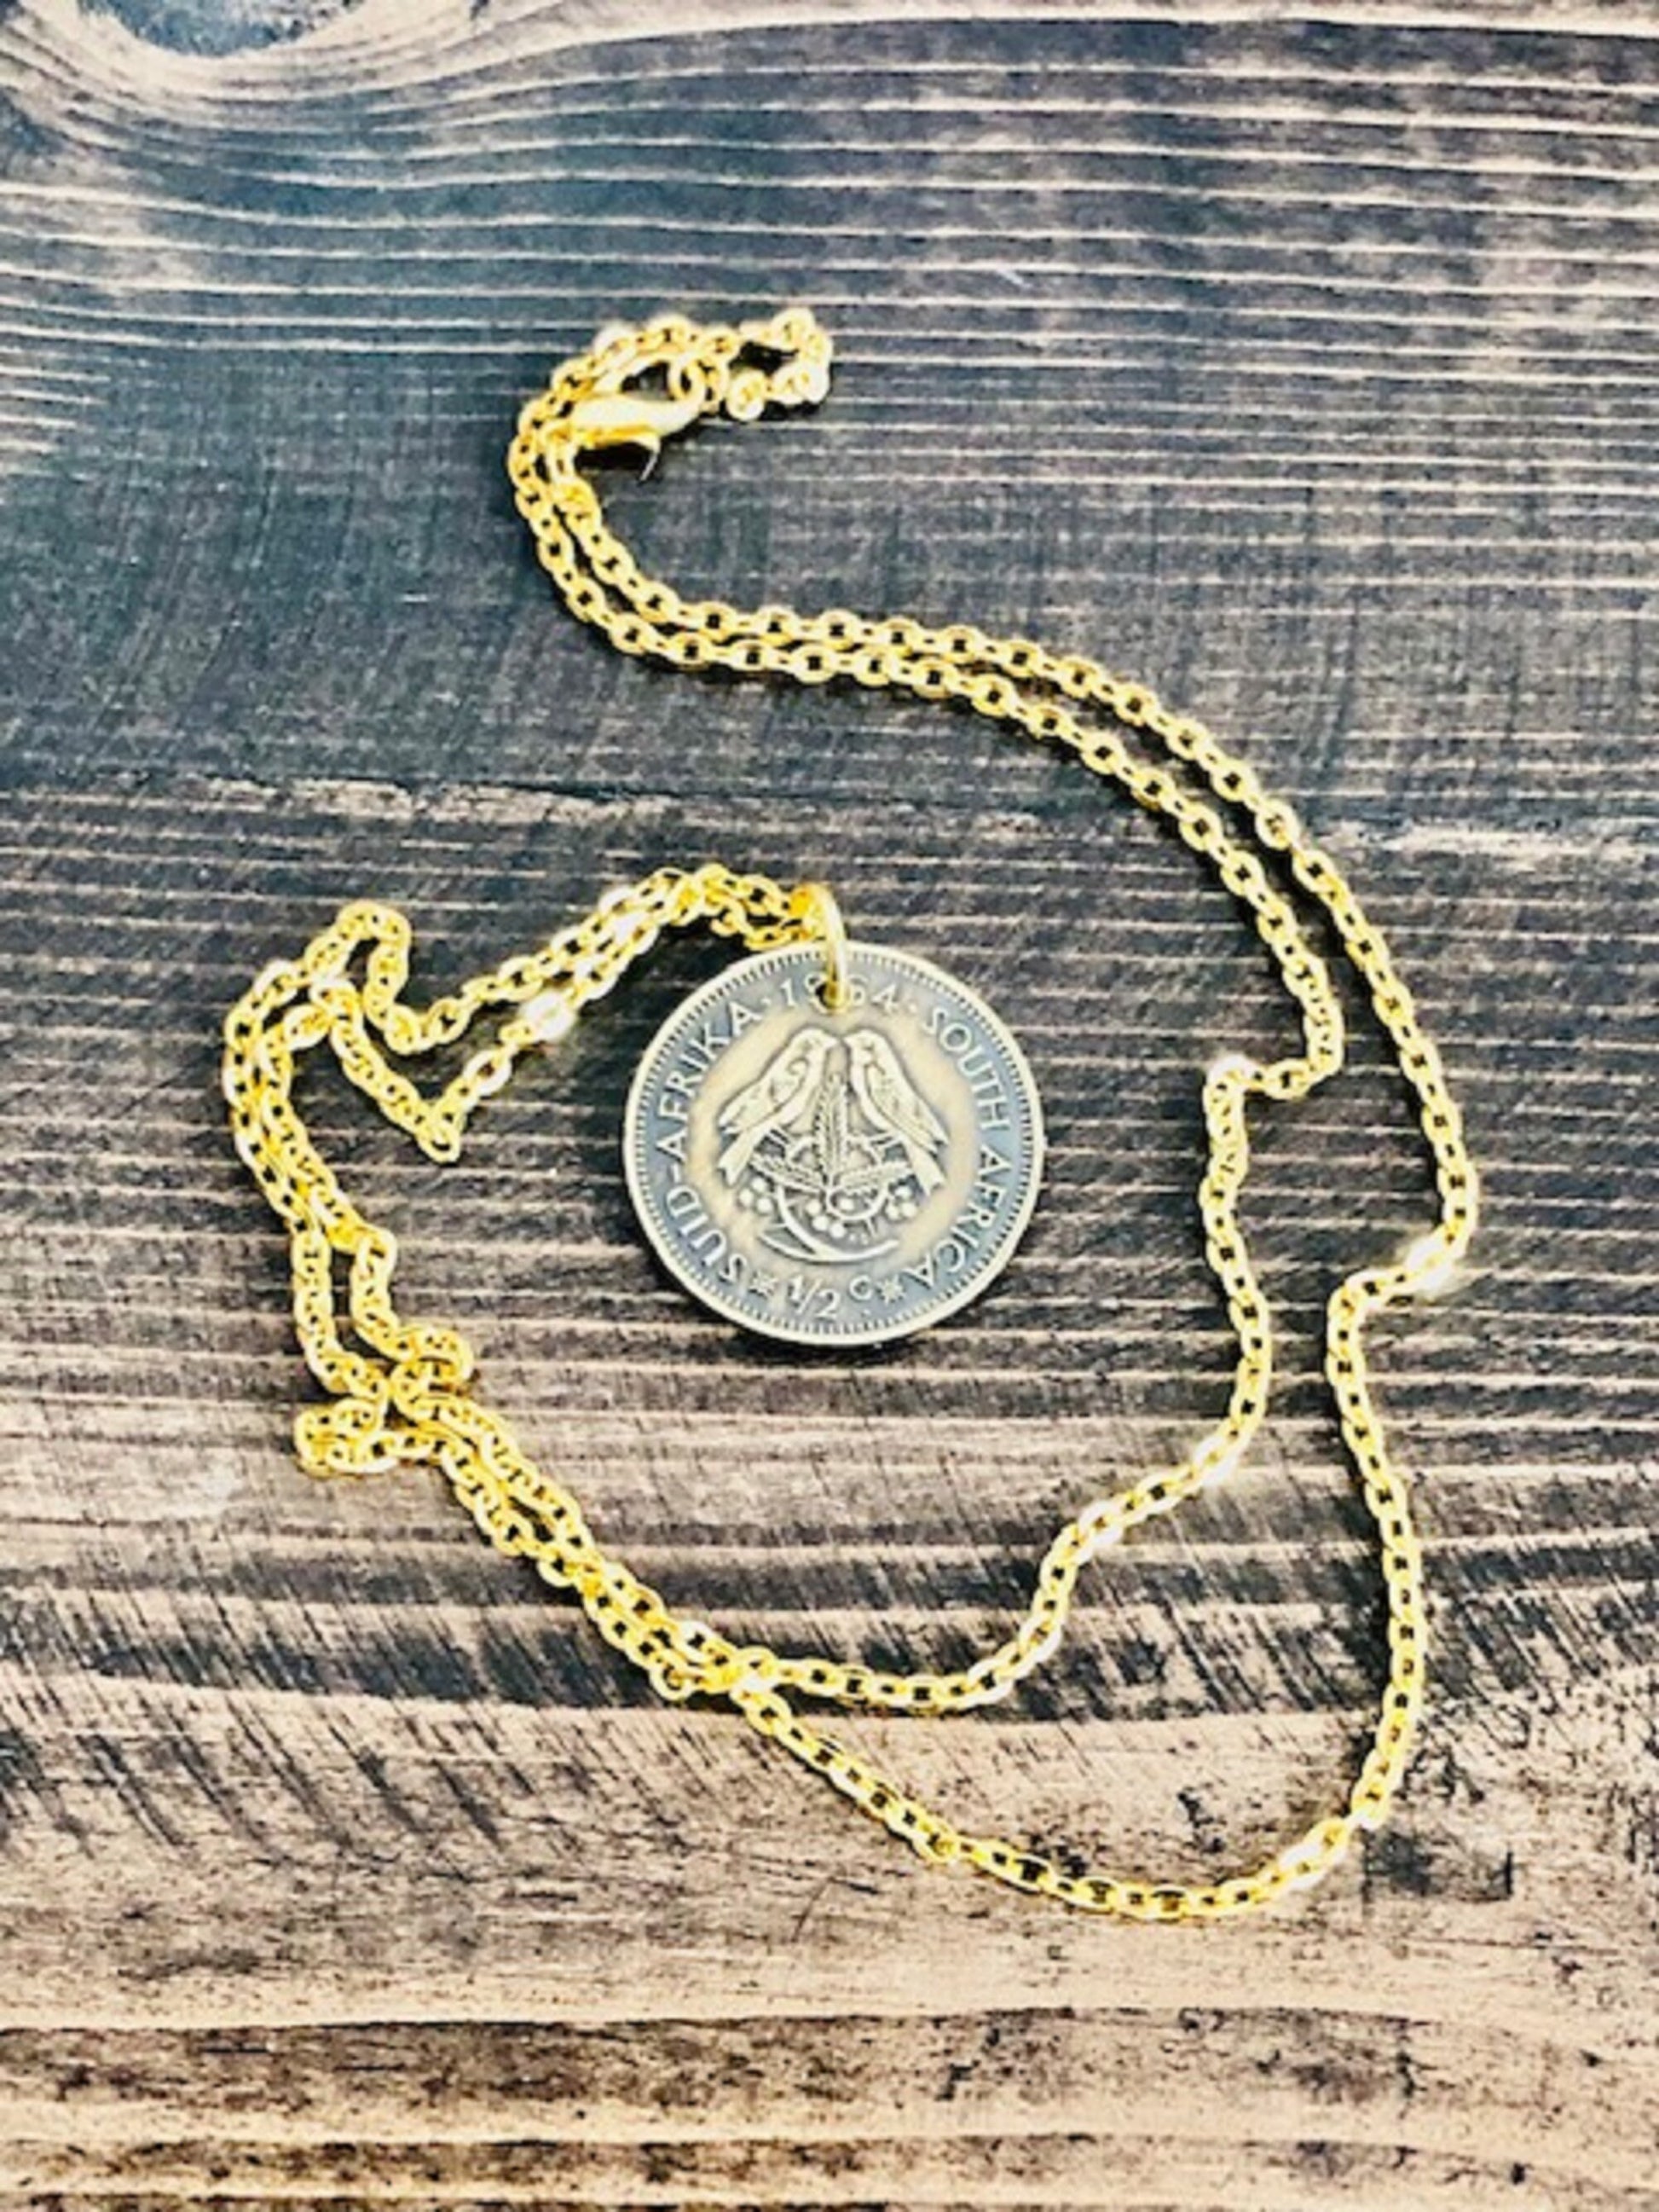 South Africa Coin Half Cent African Pendant Personal Necklace Vintage Handmade Jewelry Gift Friend Charm For Him Her World Coin Collector